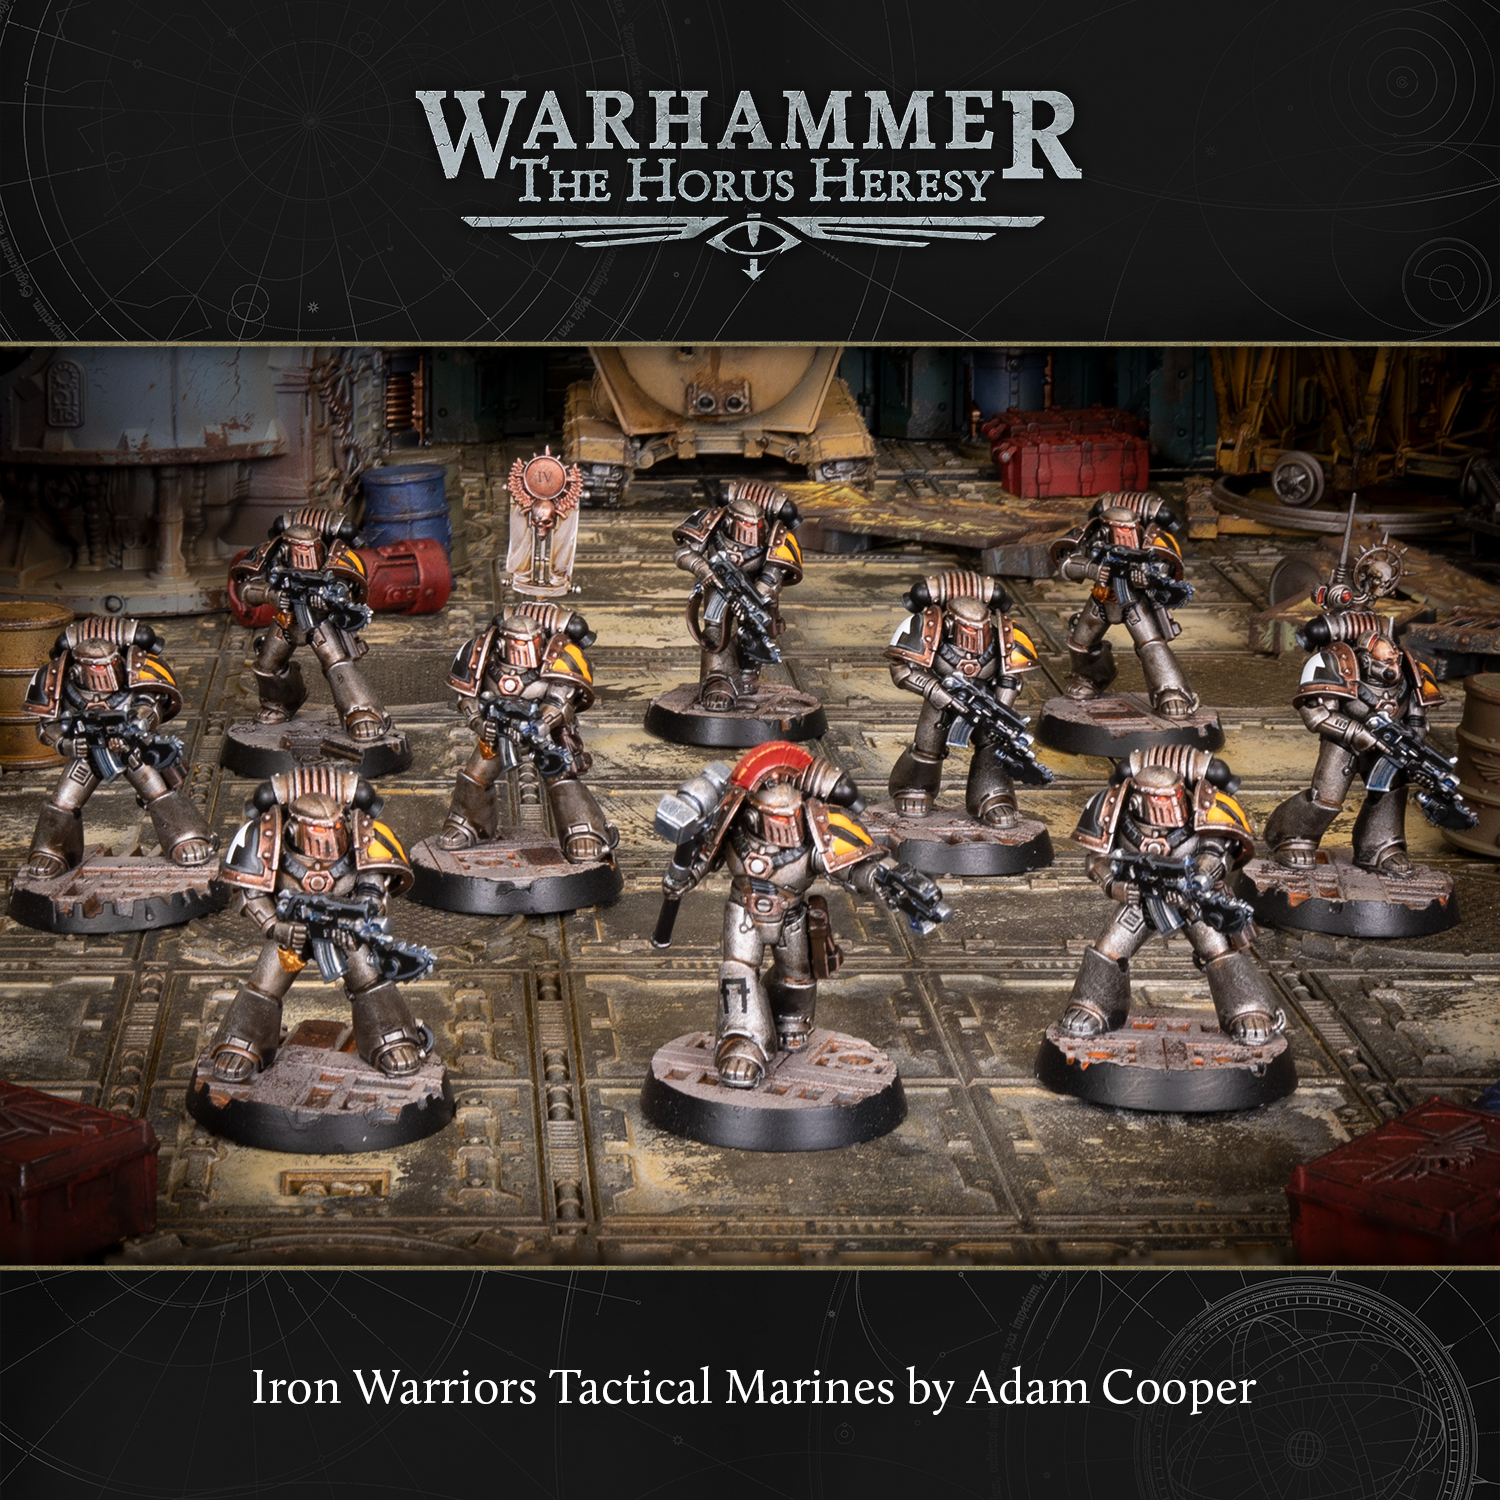 Warhammer Official on X: The Warhammer: The Horus Heresy team have been  hard at work painting their miniatures! Share your miniatures from the Age  of Darkness with us below. #WarhammerCommunity  /